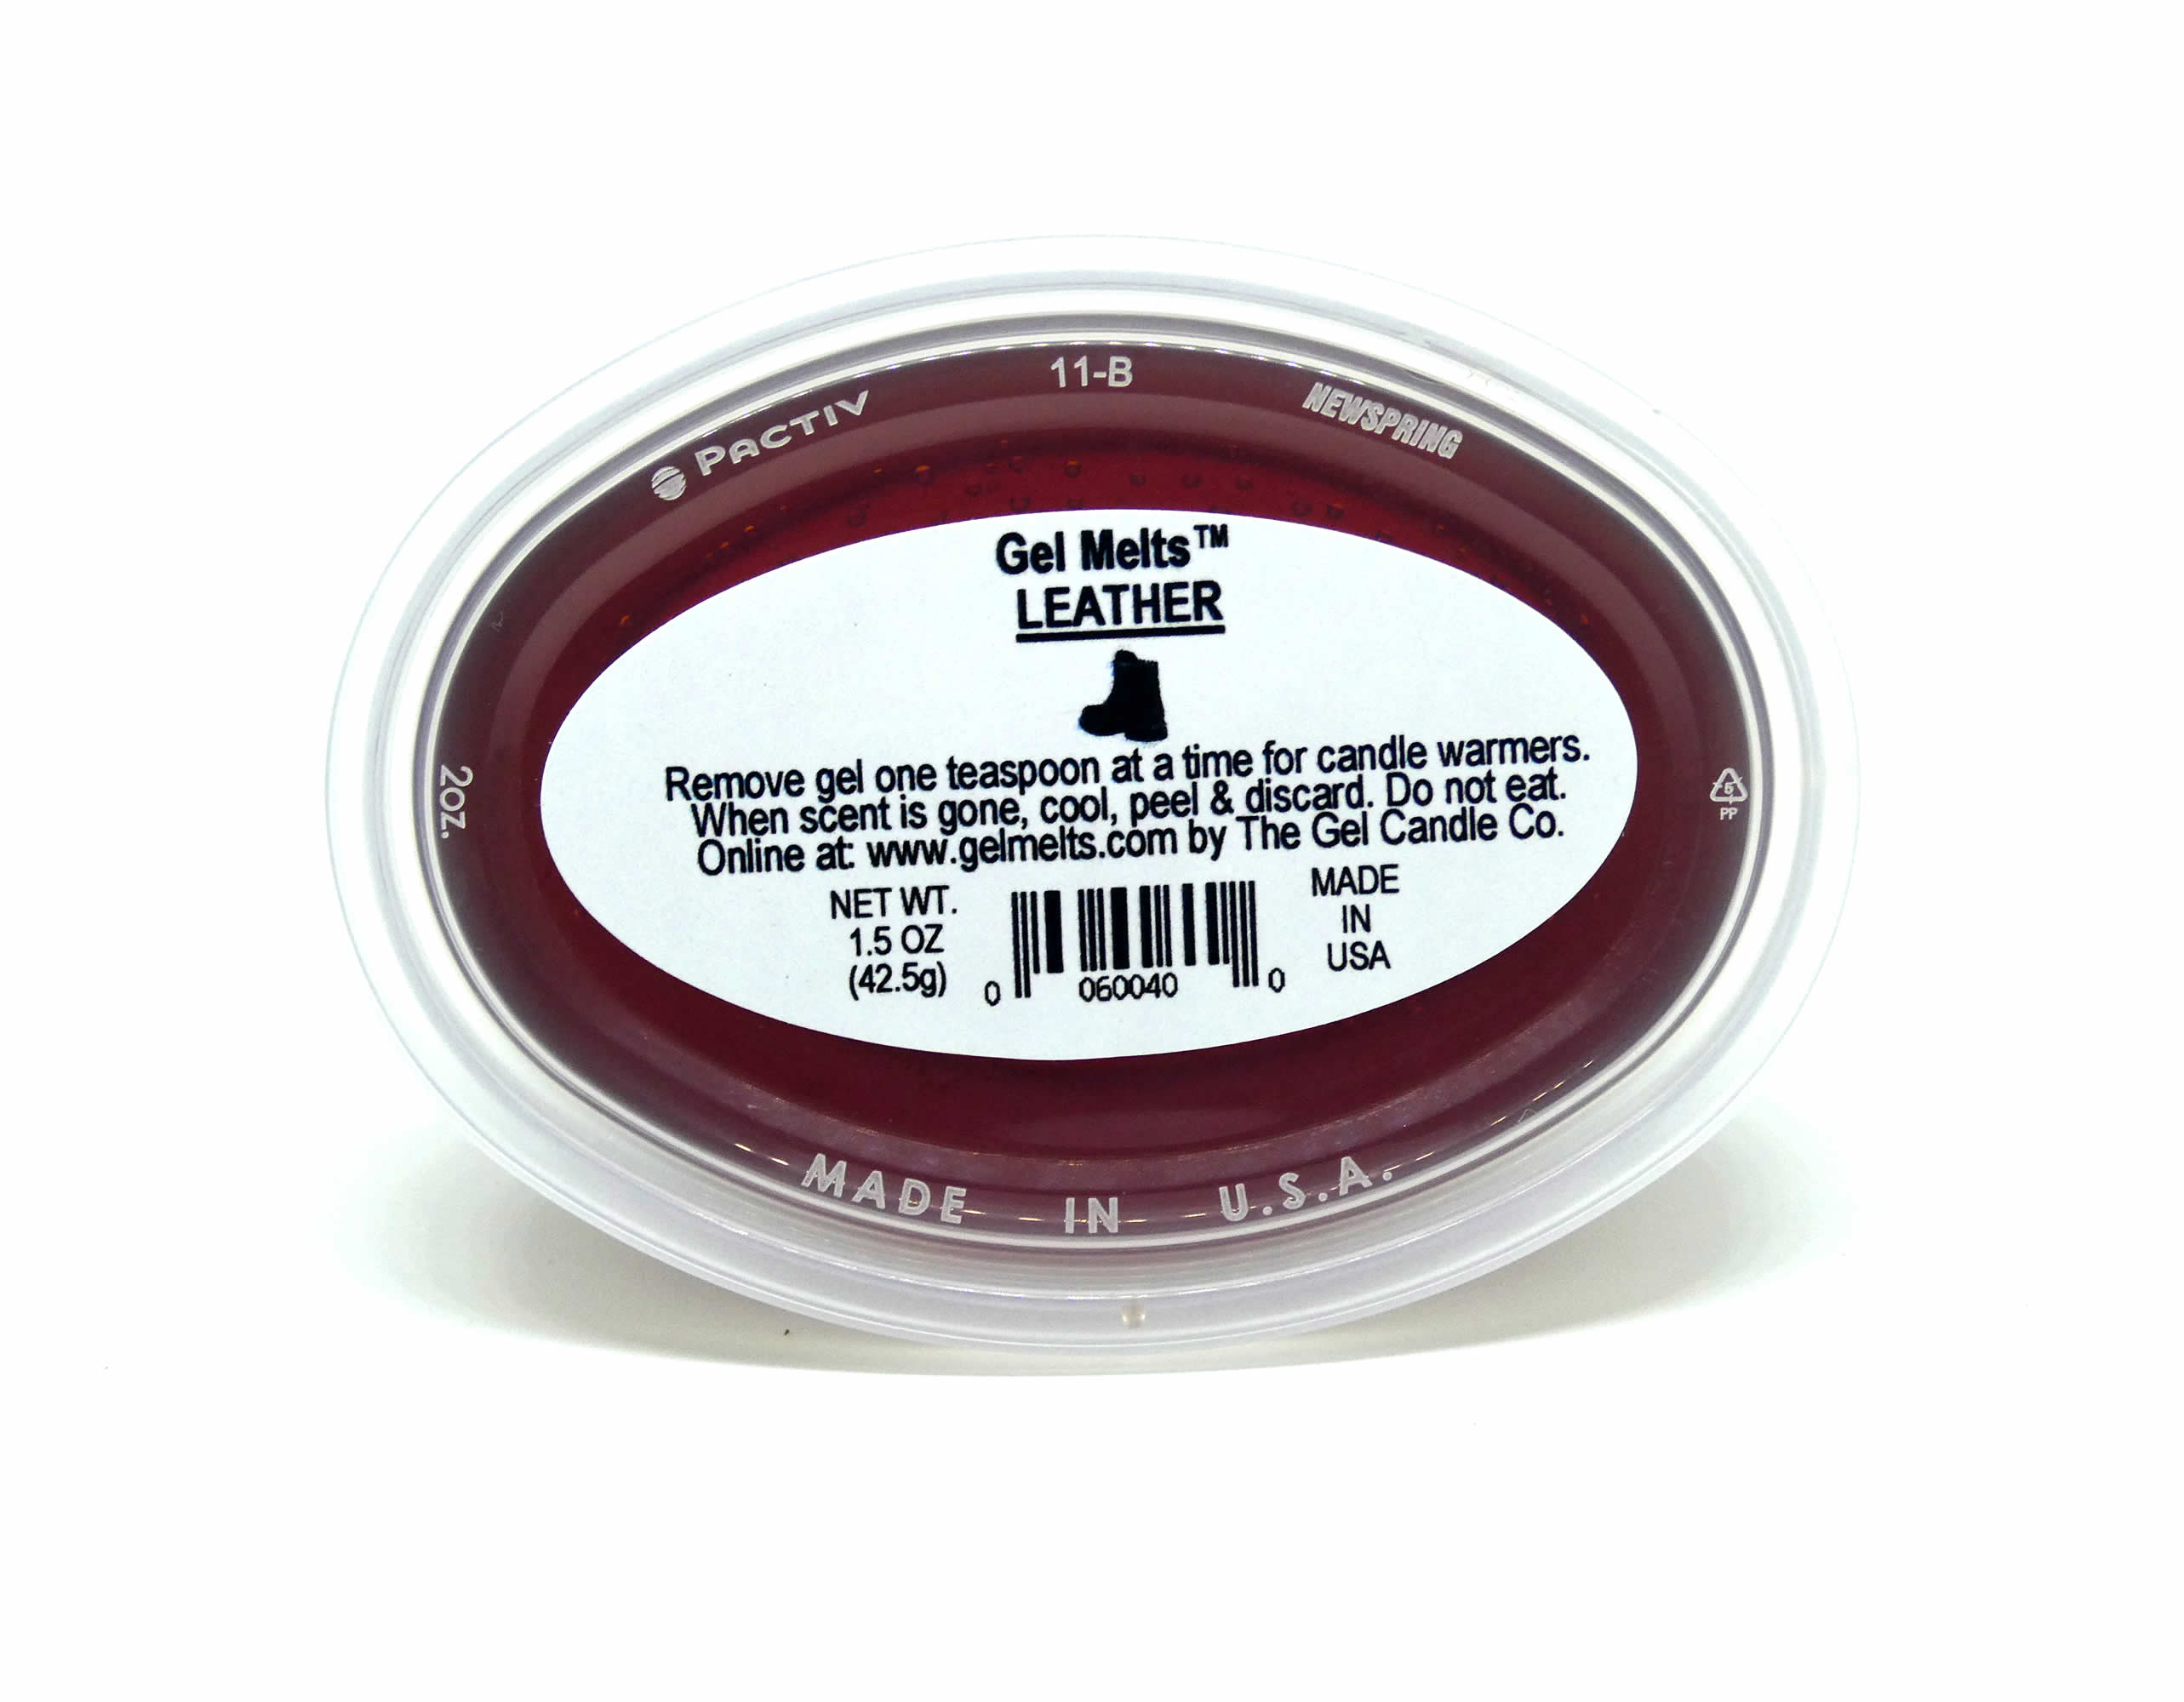 Leather scented Gel Melts™ for warmers - 3 pack